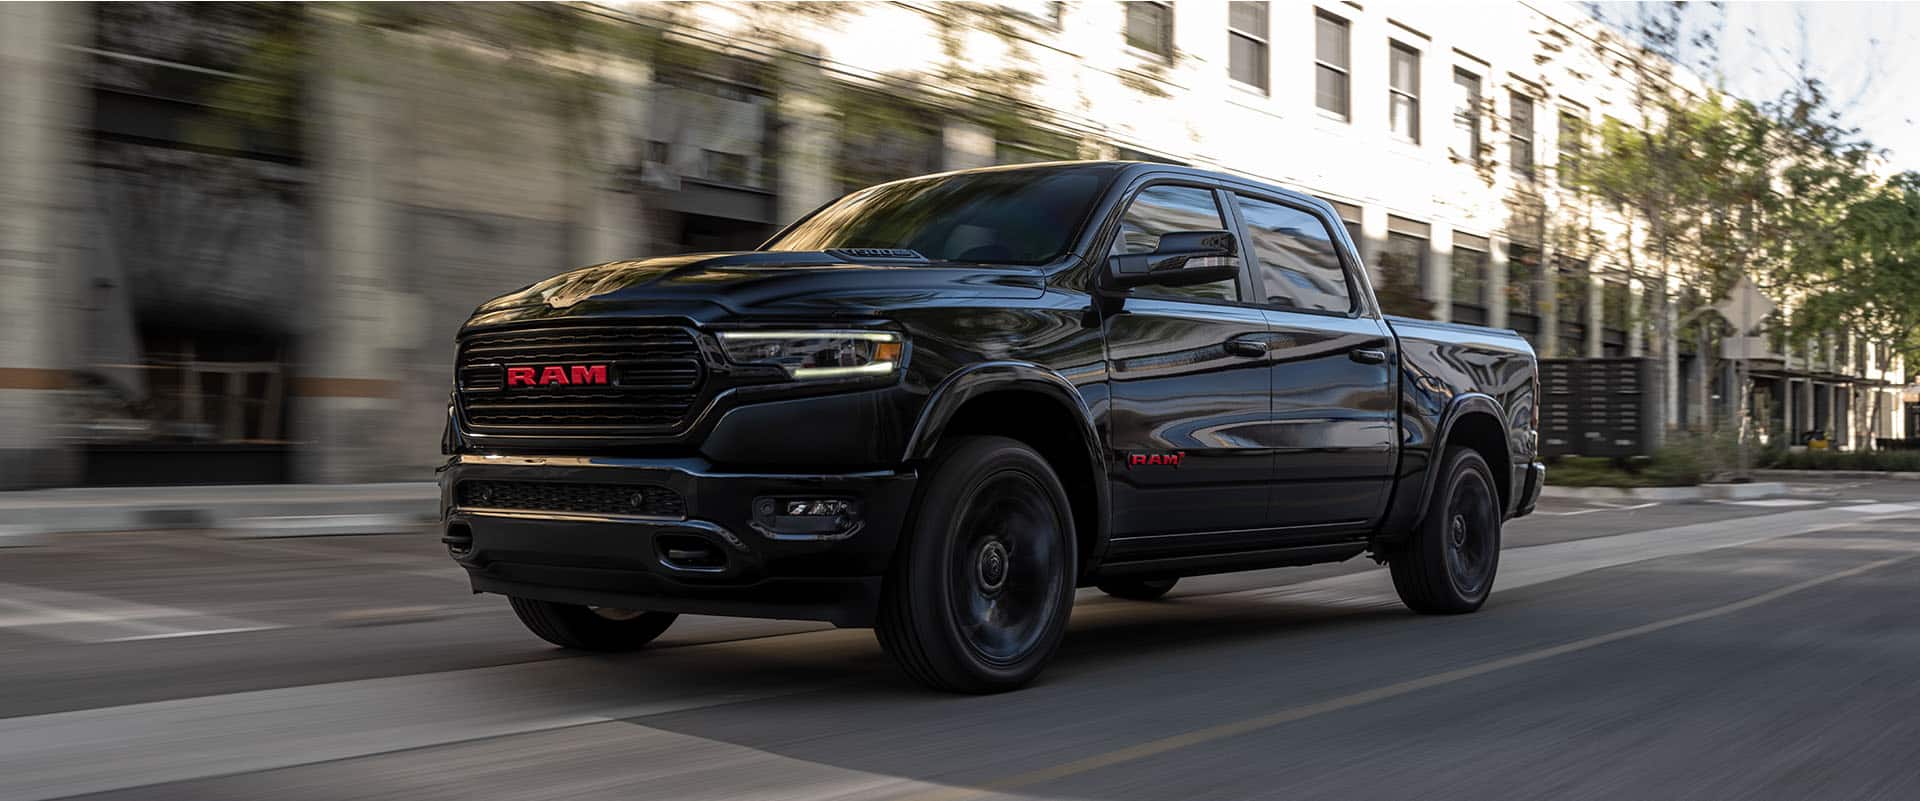 A 2023 Ram 1500 Limited Ram Red Edition being driven on a city street with the background blurred to indicate the vehicle is in motion.